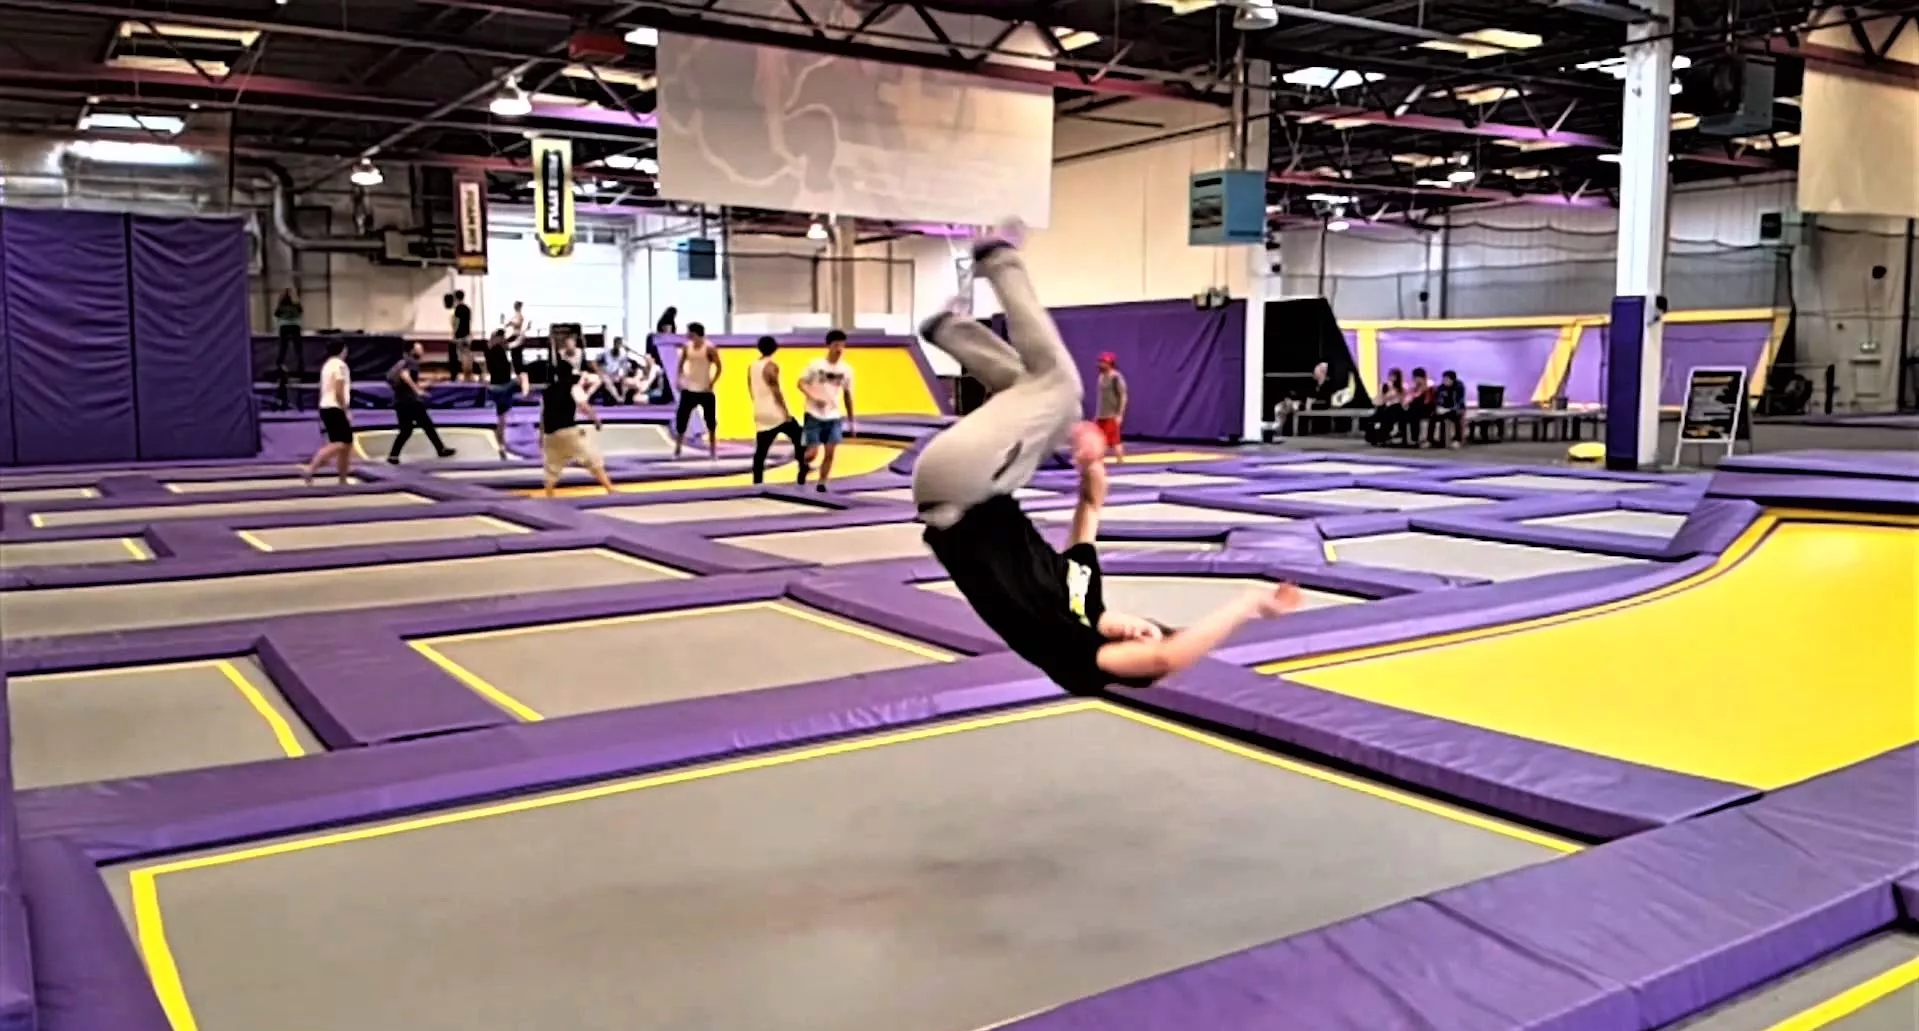 Jumpup Trampoline Park in Bahrain, Middle East | Trampolining - Rated 3.7